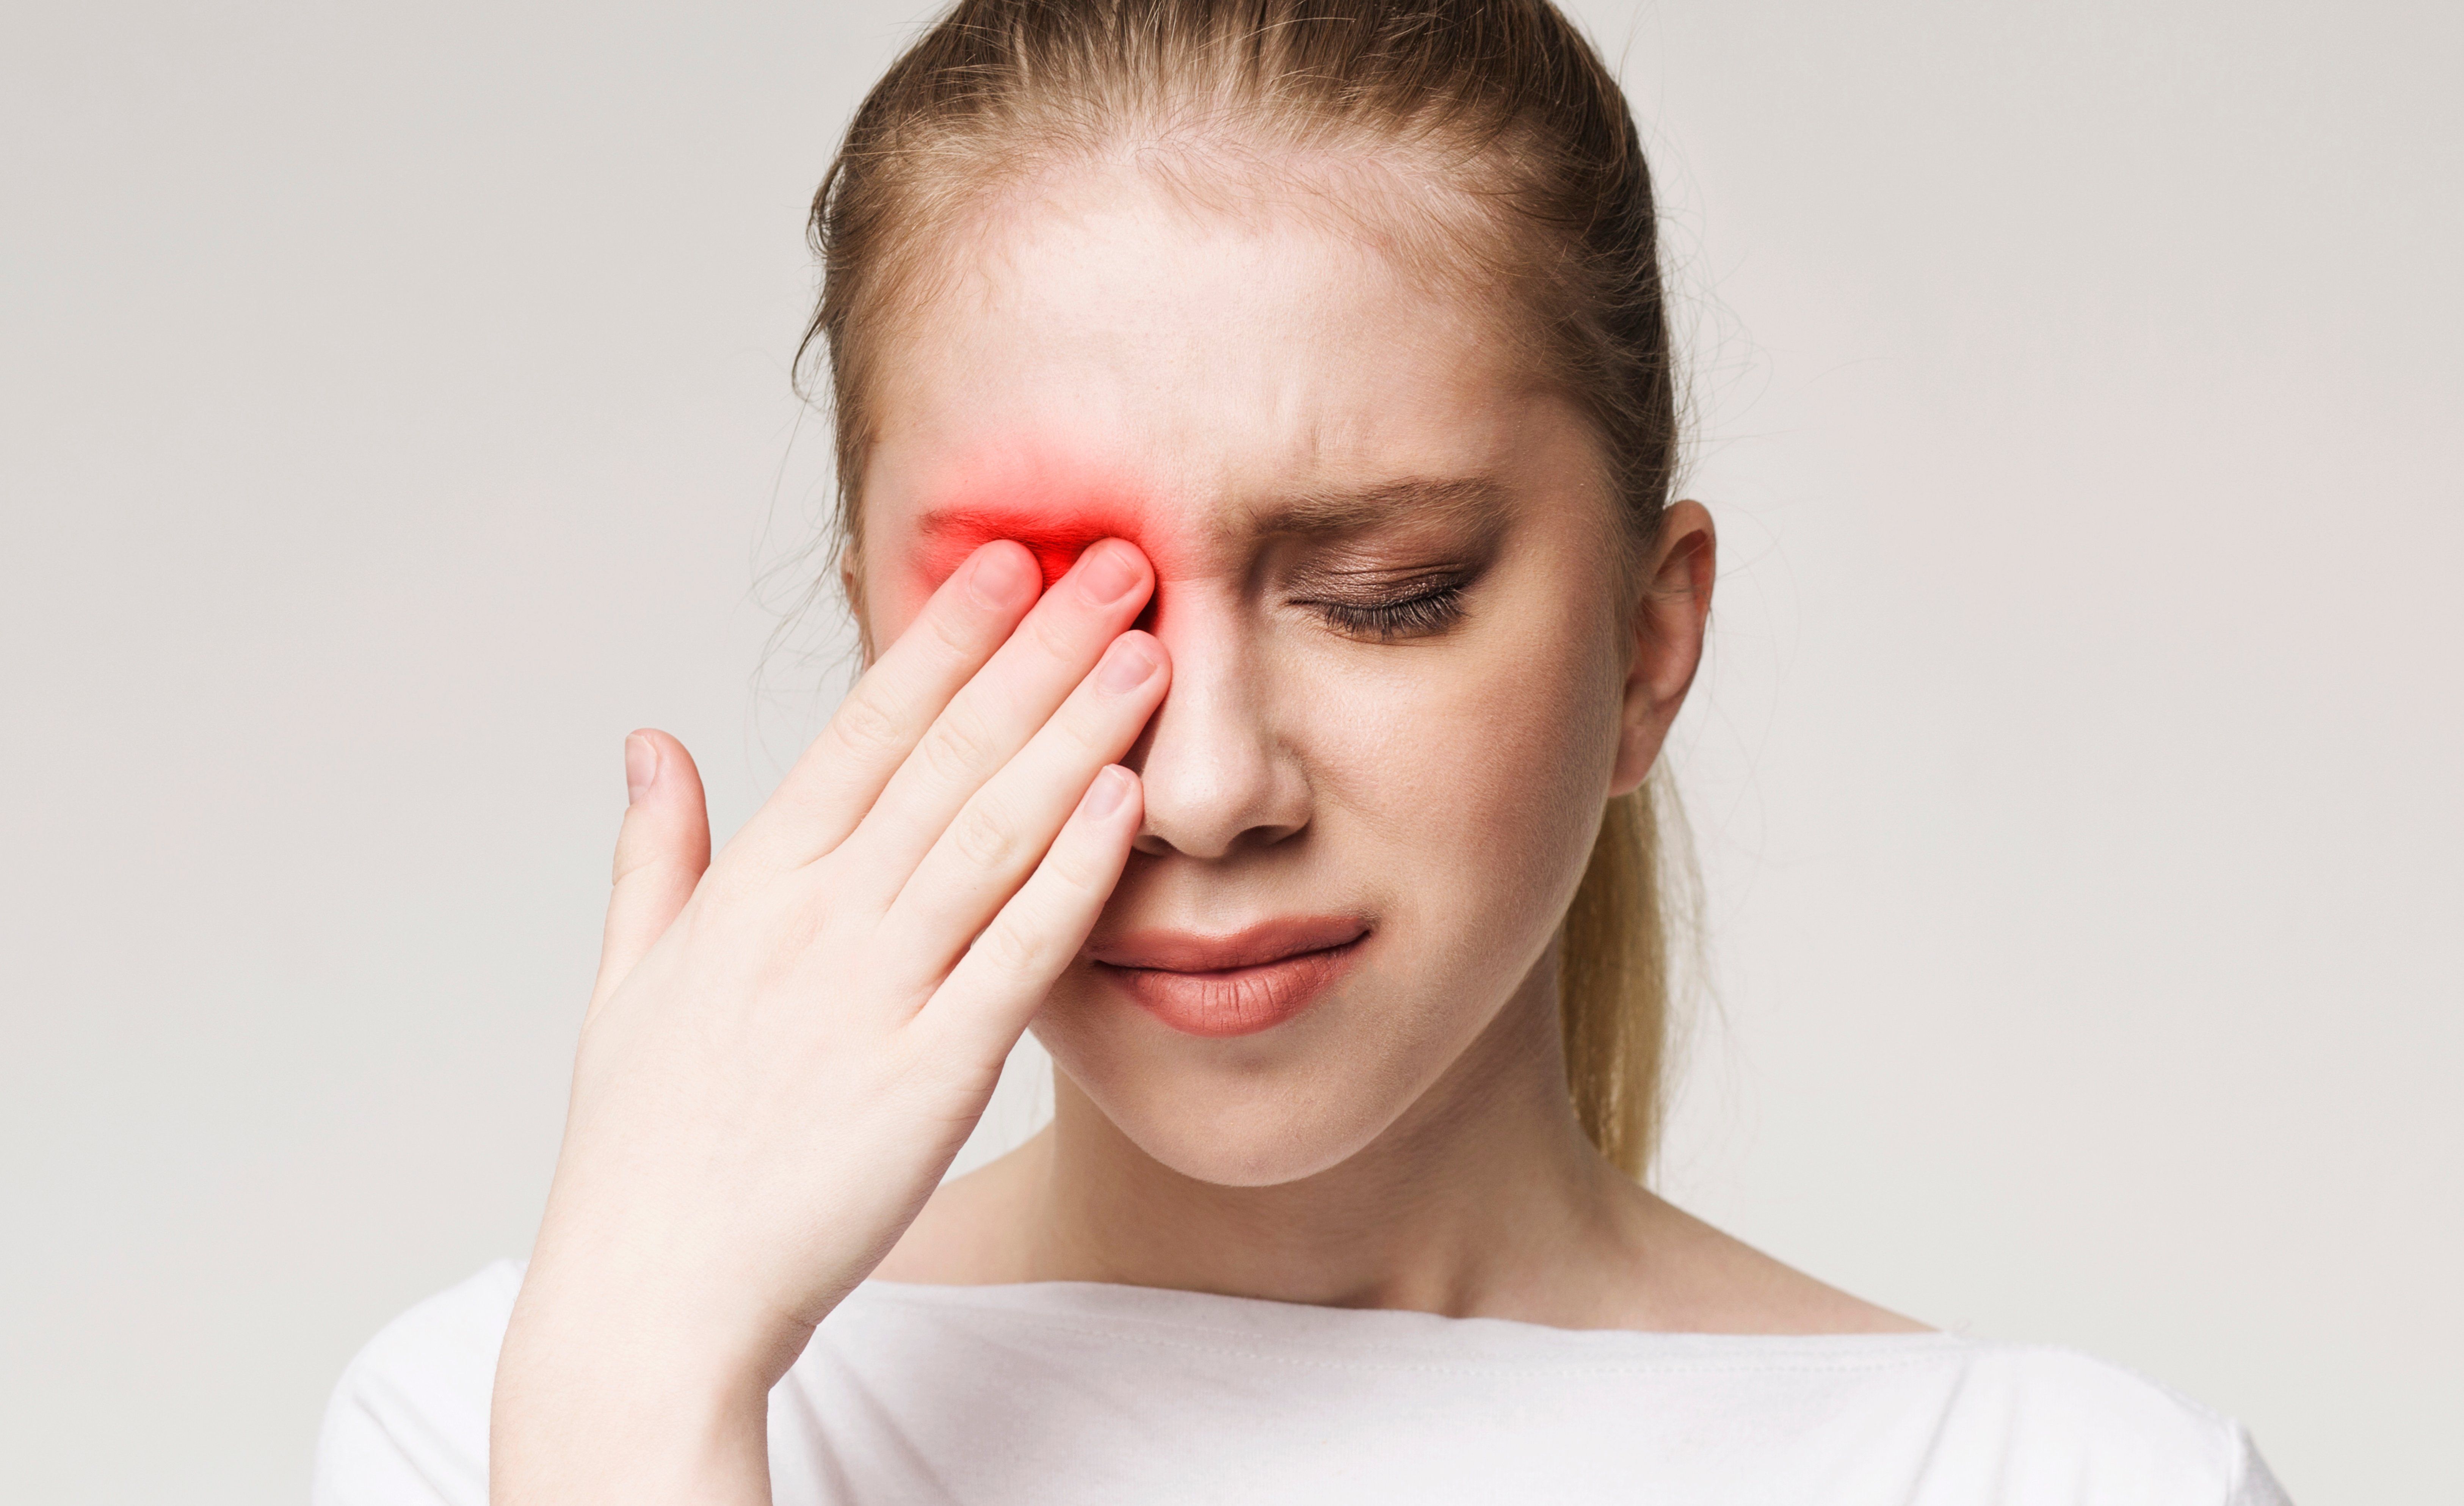 Common Eye Injuries and How to Respond